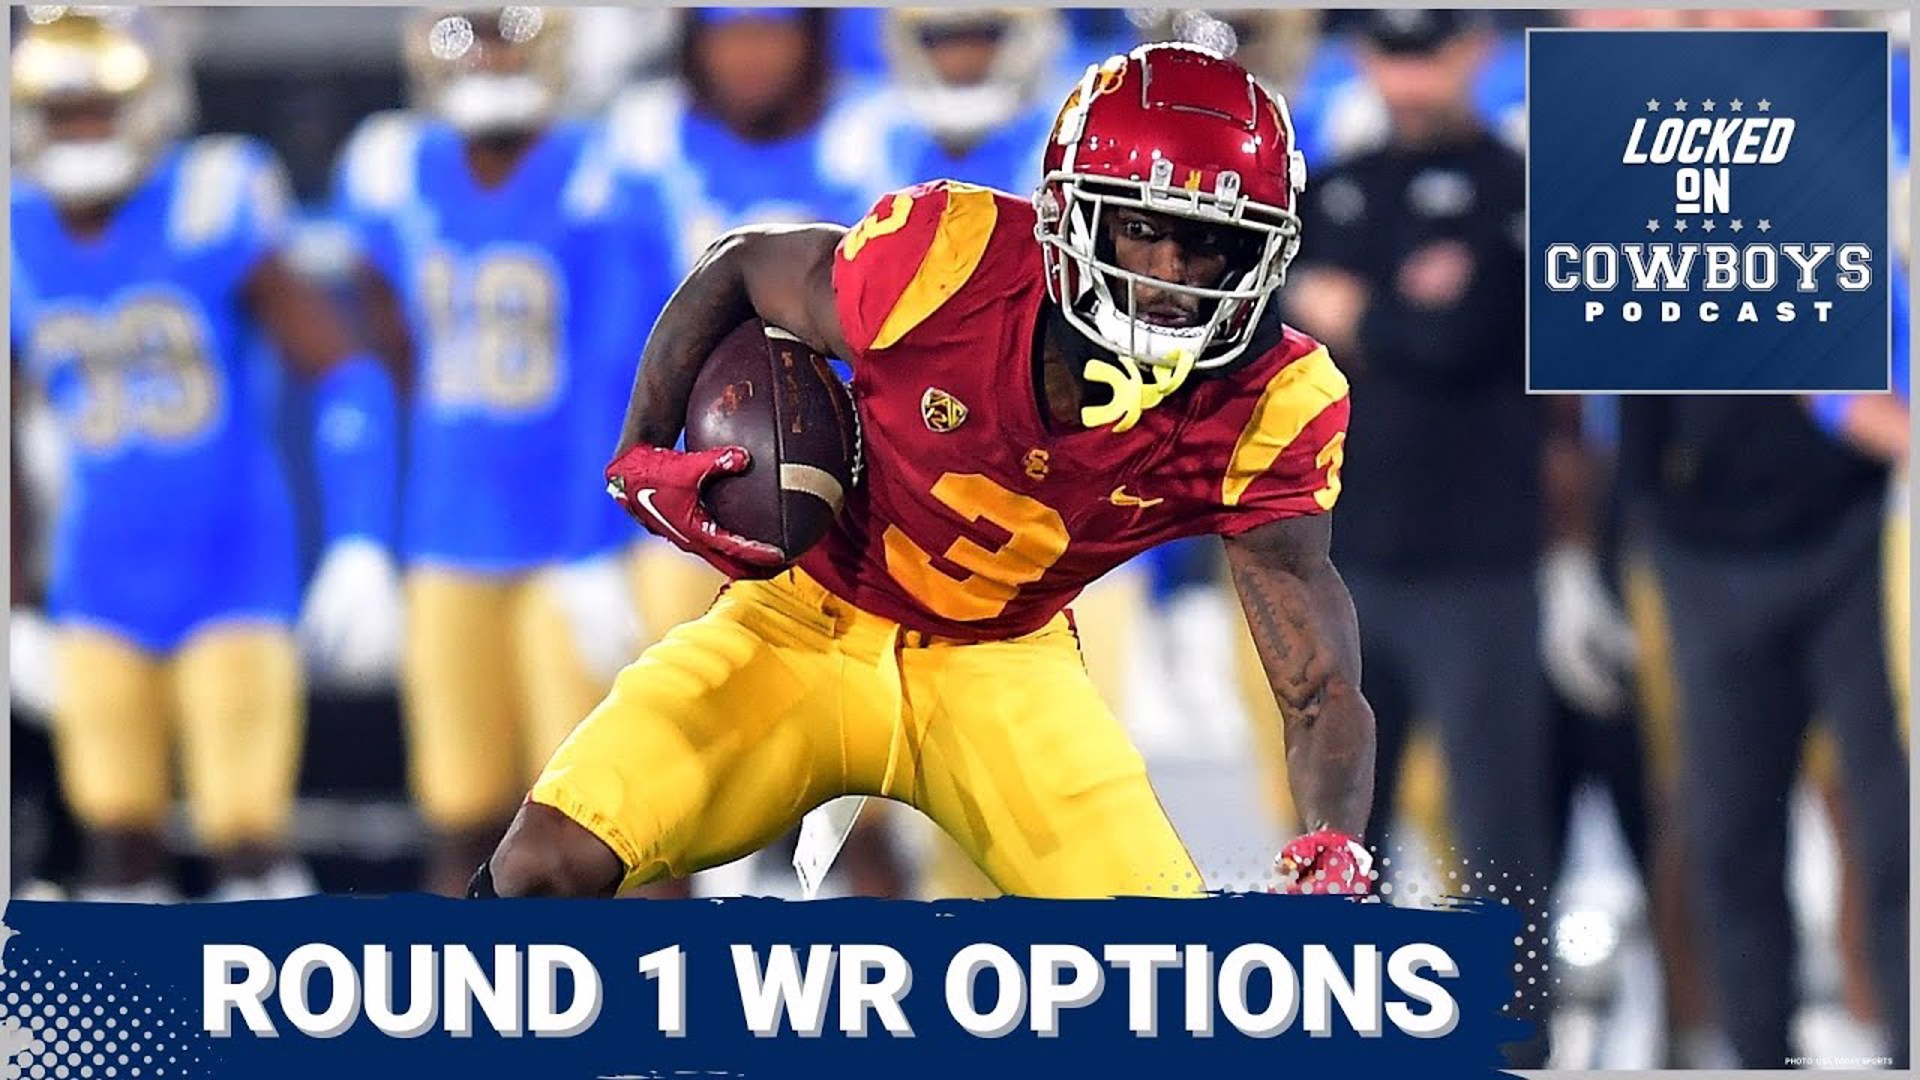 Marcus Mosher and Landon McCool discuss three WR options -- Johnston, Jordan Addison and Jaxon Smith-Njigba -- and how they'd fit in with the Cowboys.